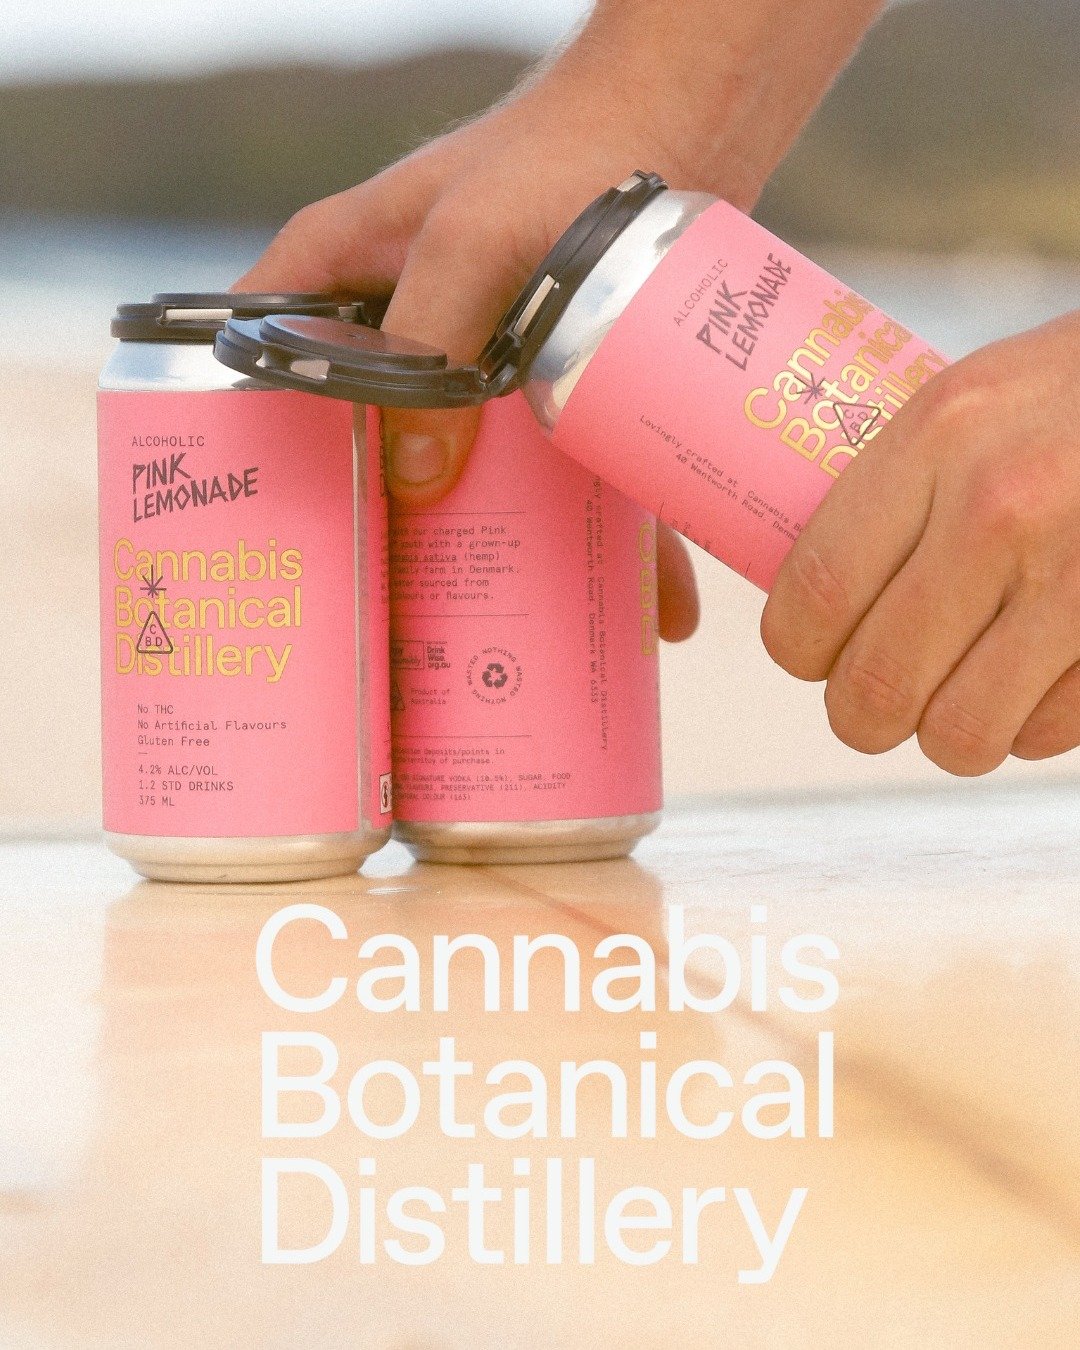 Coming Soon to your local watering hole. 🥤

Kickback with the nostalgic burst of real raspberry &amp; lemon, charged with the homegrown hemp spirit created by @cannabisbotanical

Made in Denmark, Western Australia. ☀️

See your local retailer for mo